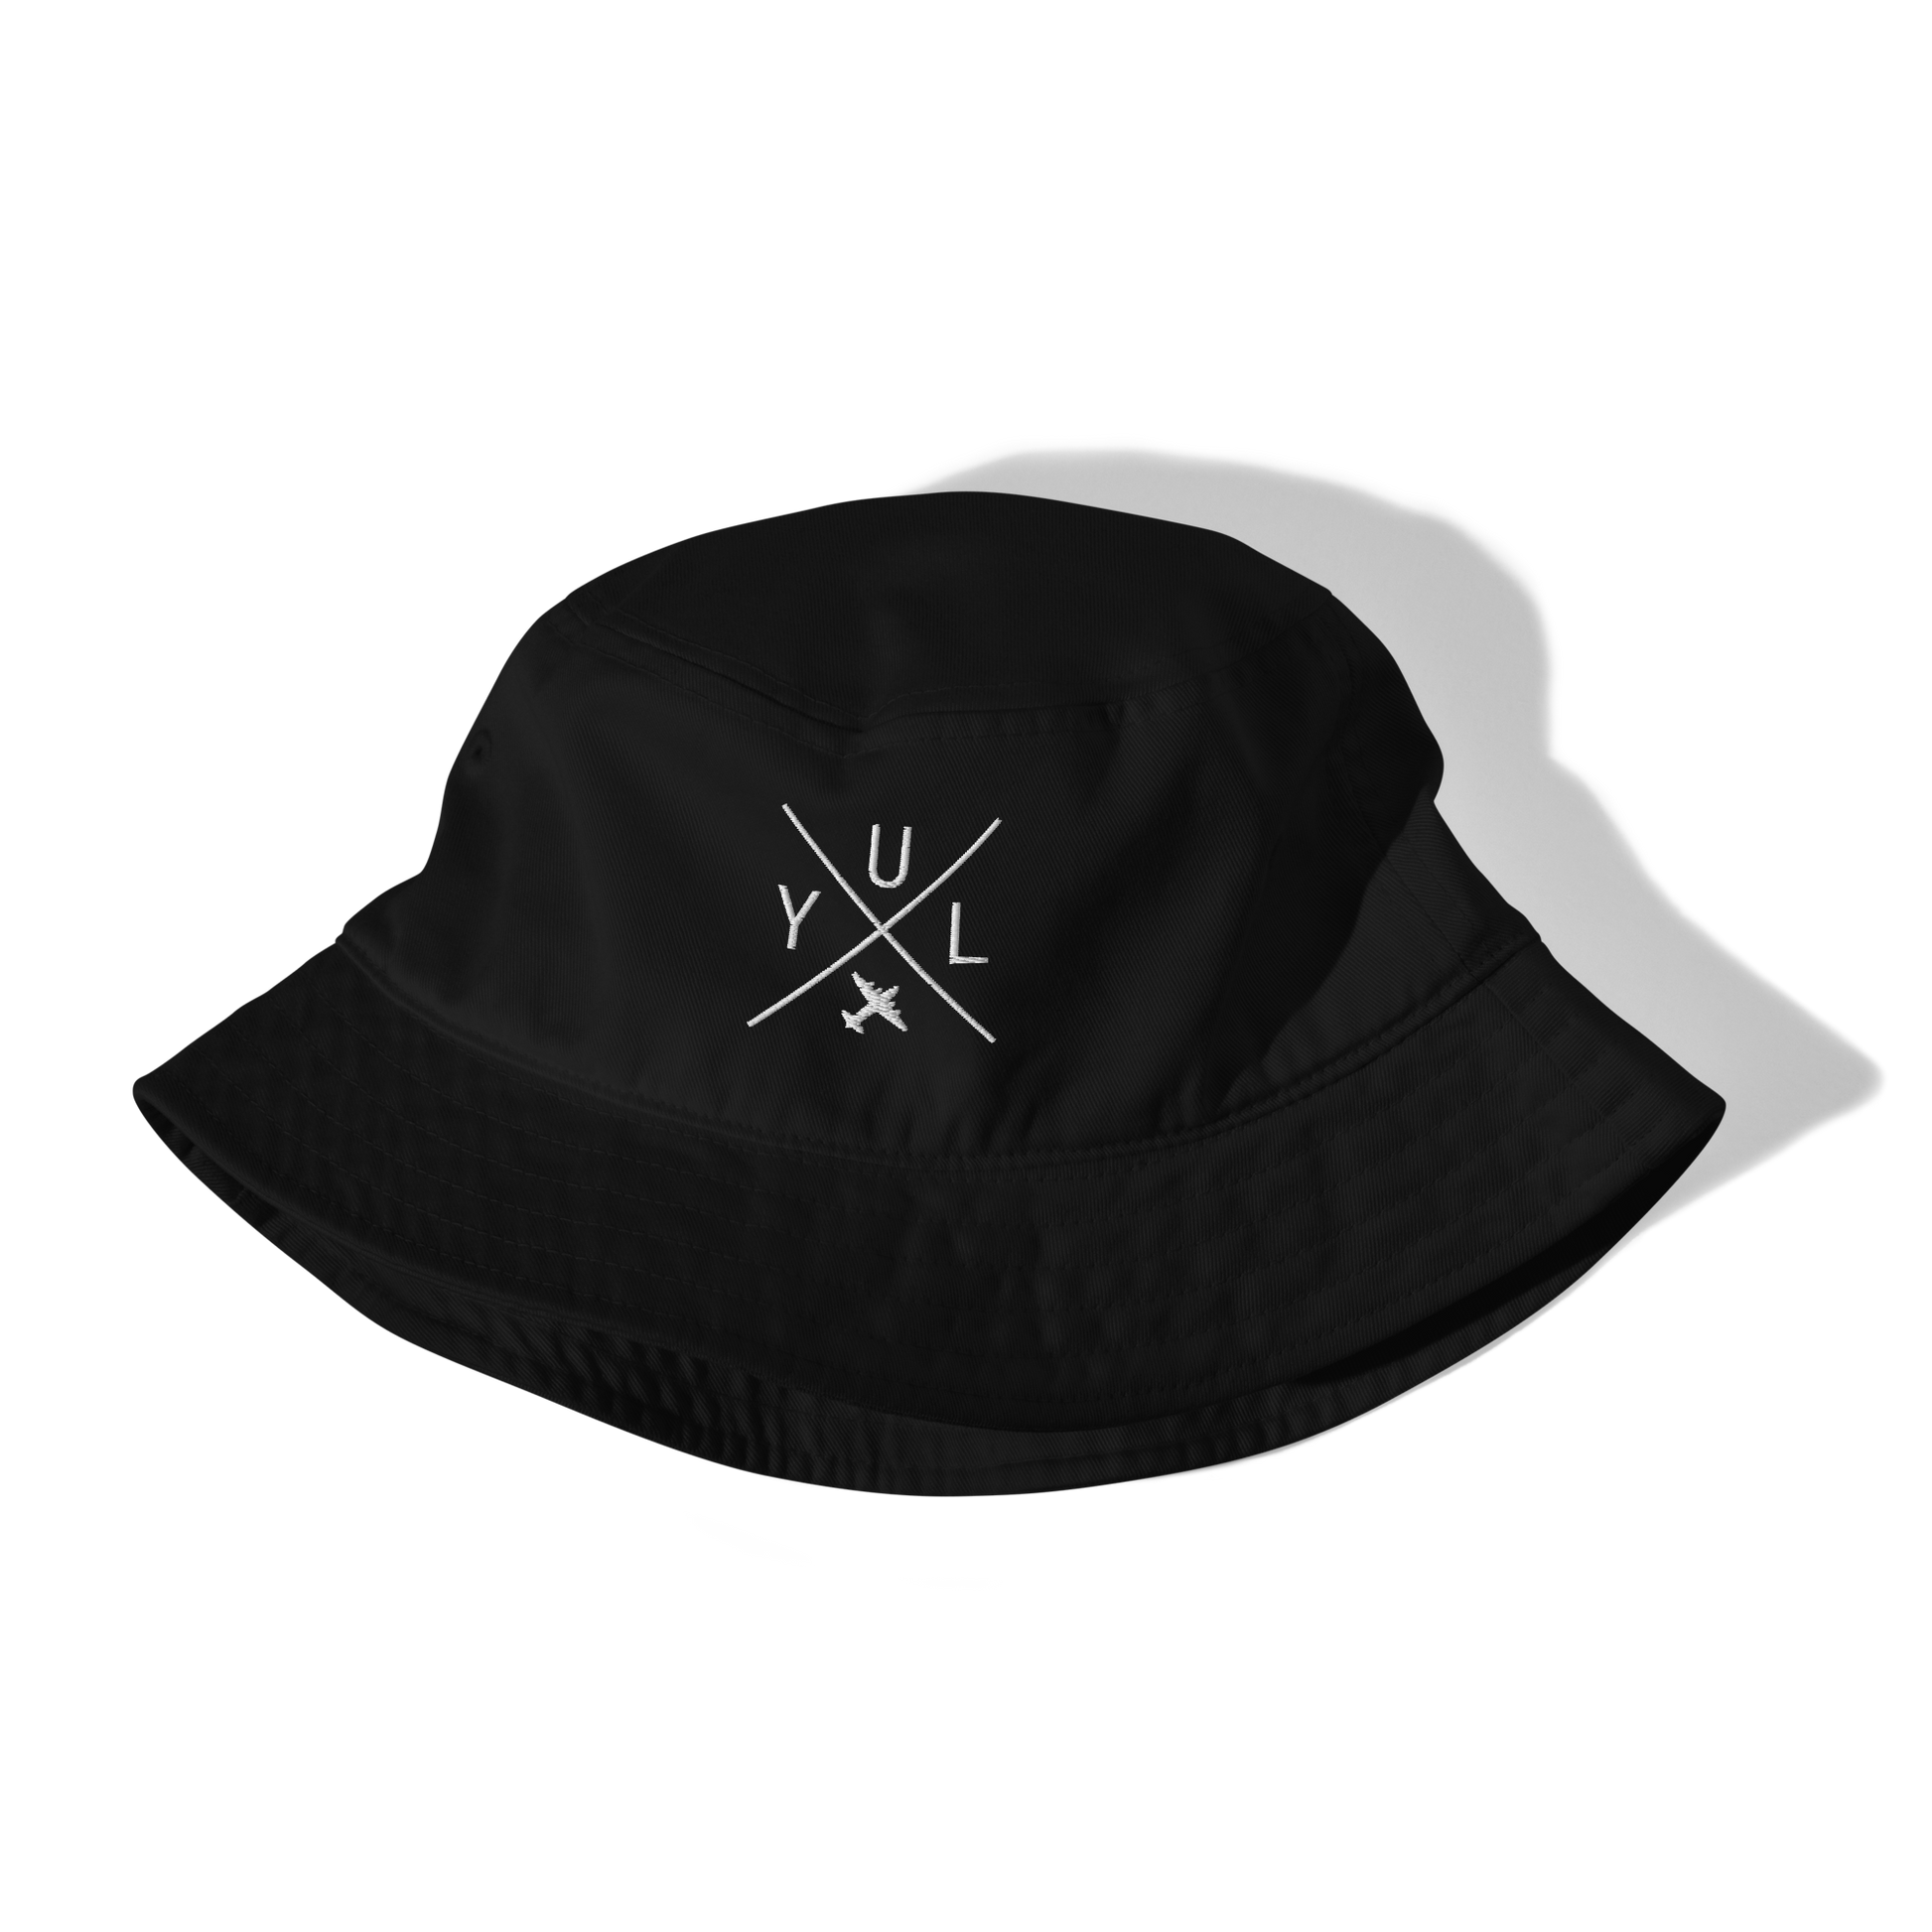 YHM Designs - YUL Montreal Organic Cotton Bucket Hat - Crossed-X Design with Airport Code and Vintage Propliner - White Embroidery - Image 02